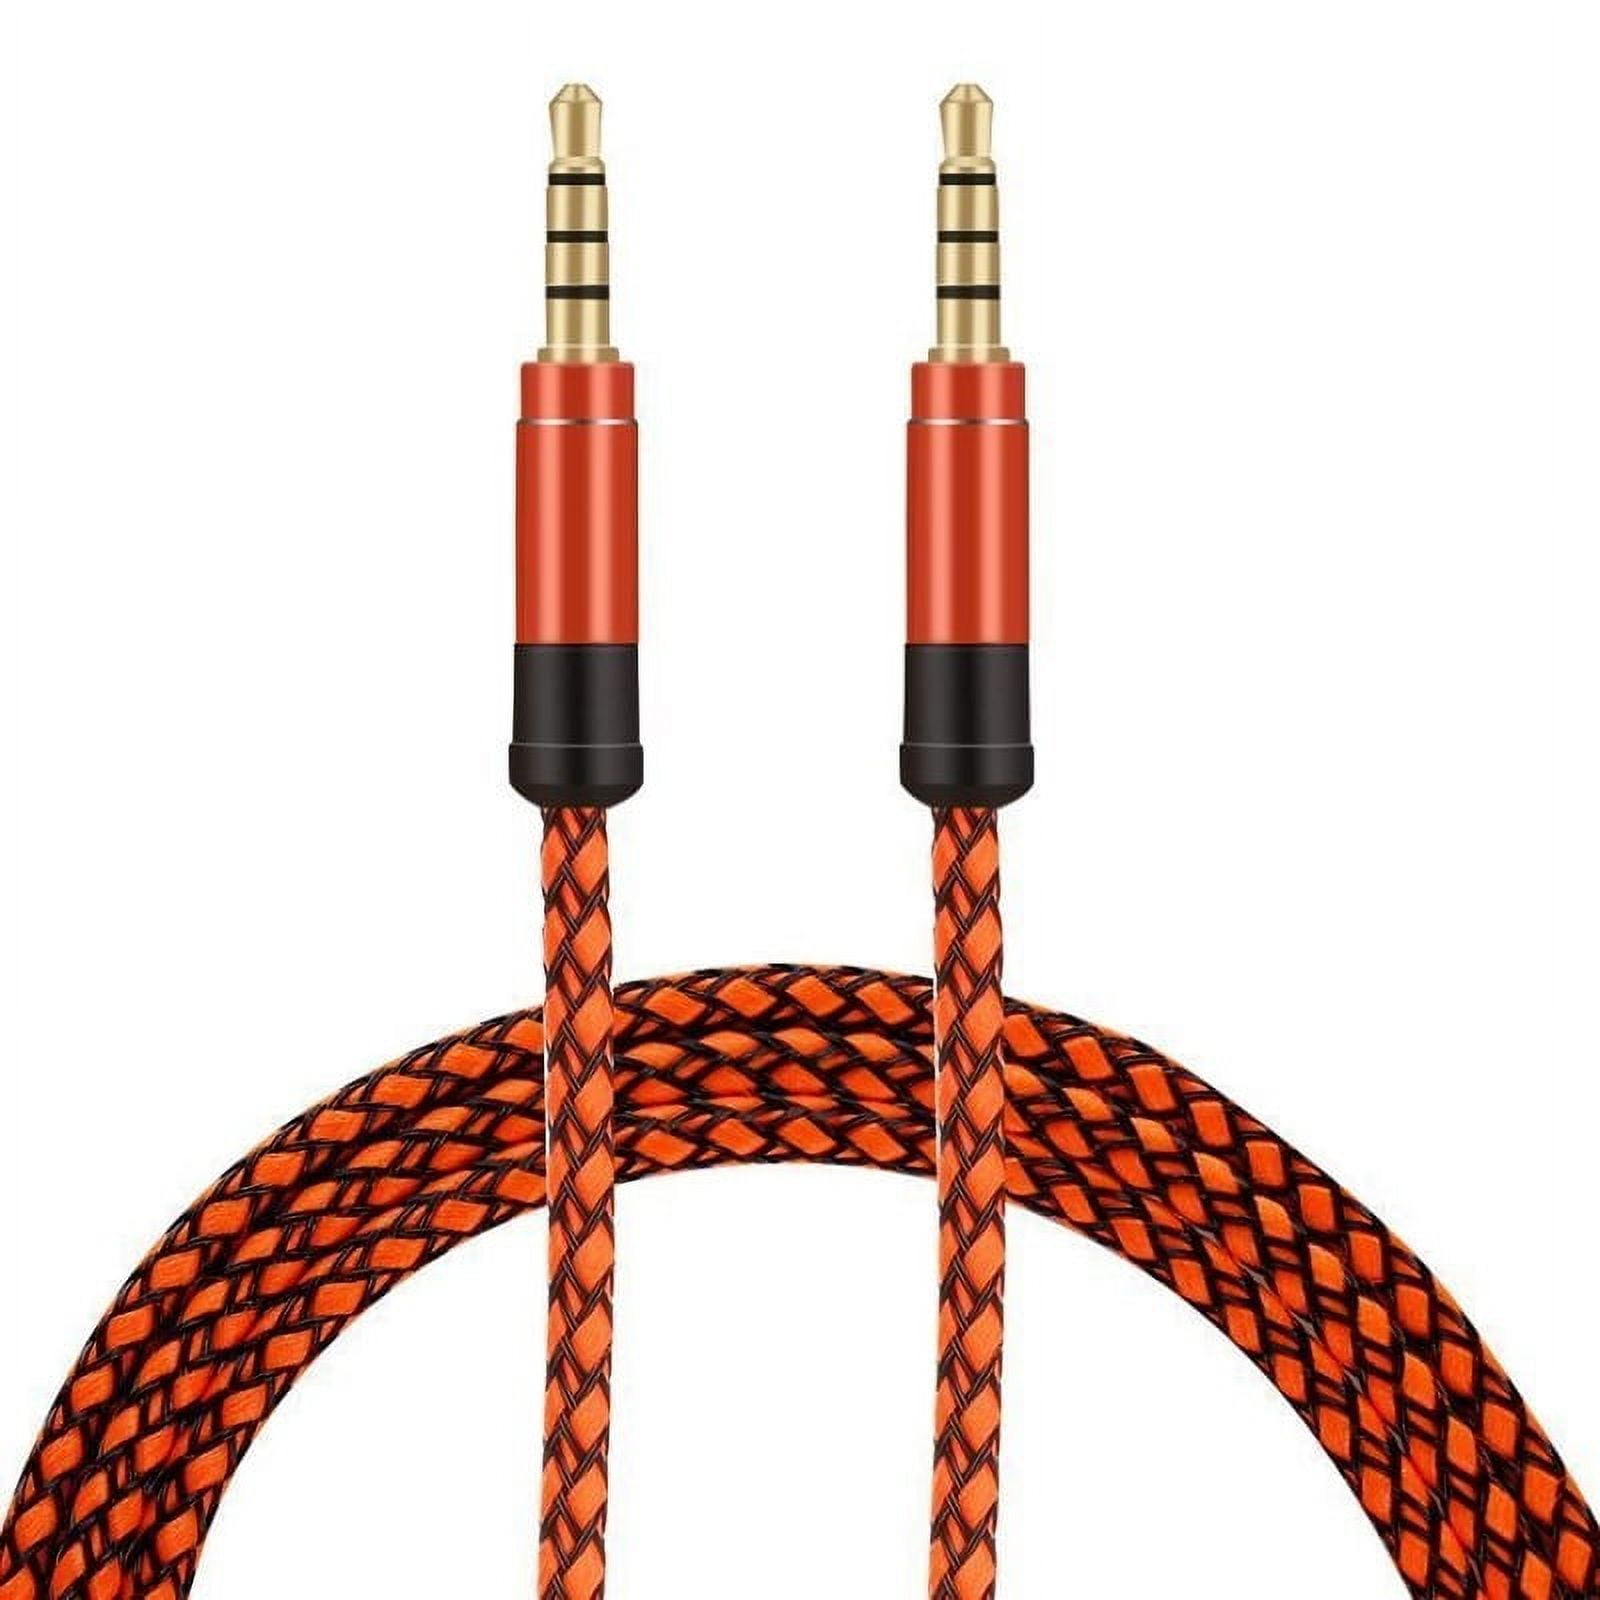 10ft 3.5mm Long AUX Cord Gold-Plated Audio Stereo Cable Orange for